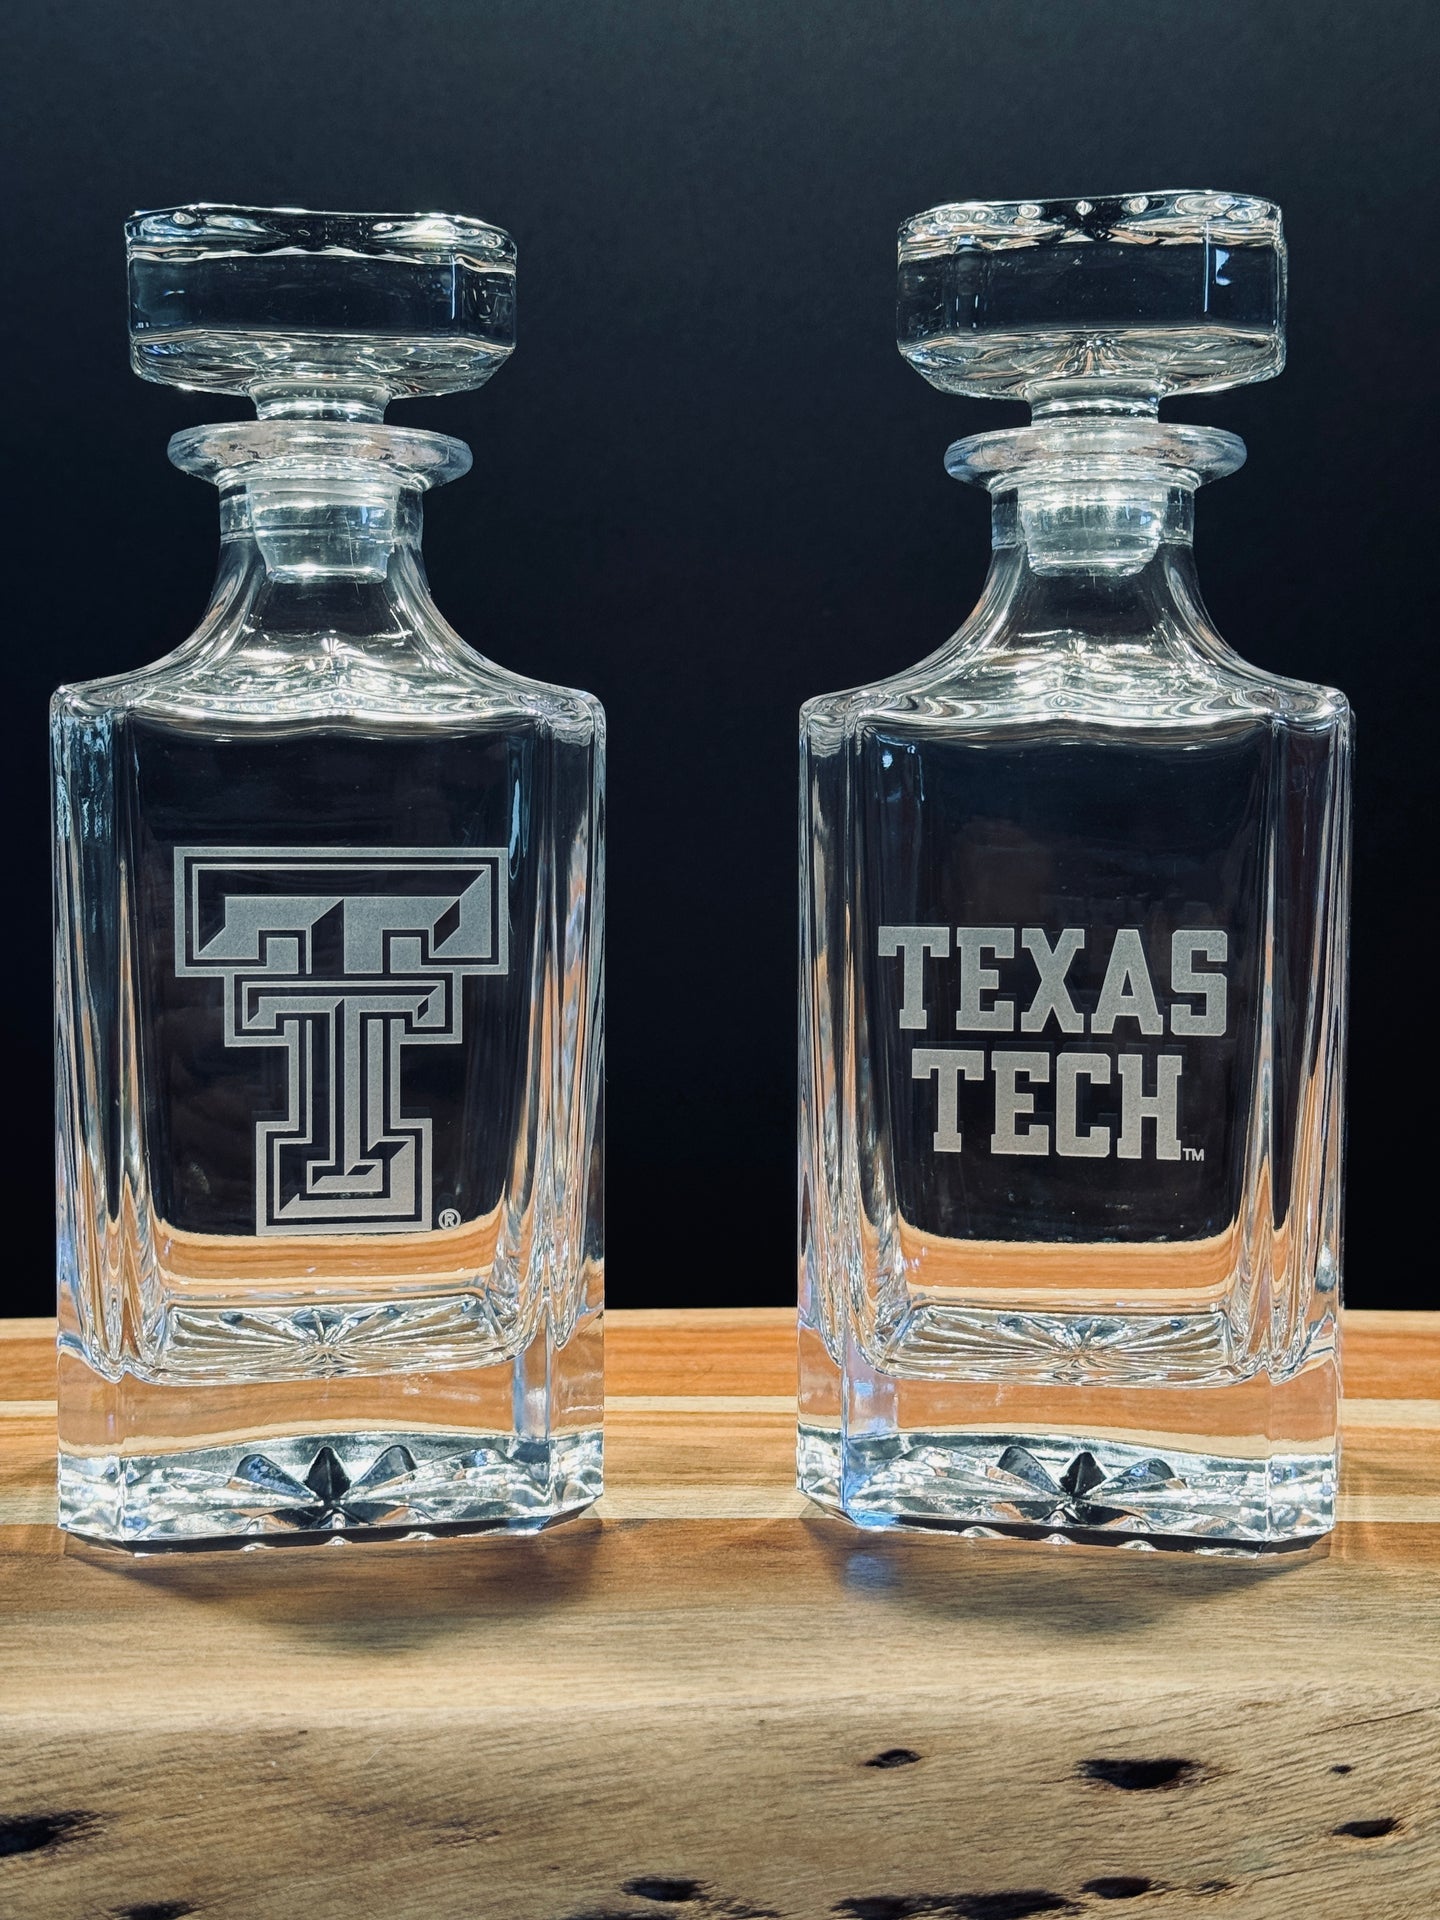 Engraved Sand Carved Texas Tech Decanter and Rocks Glass Sets